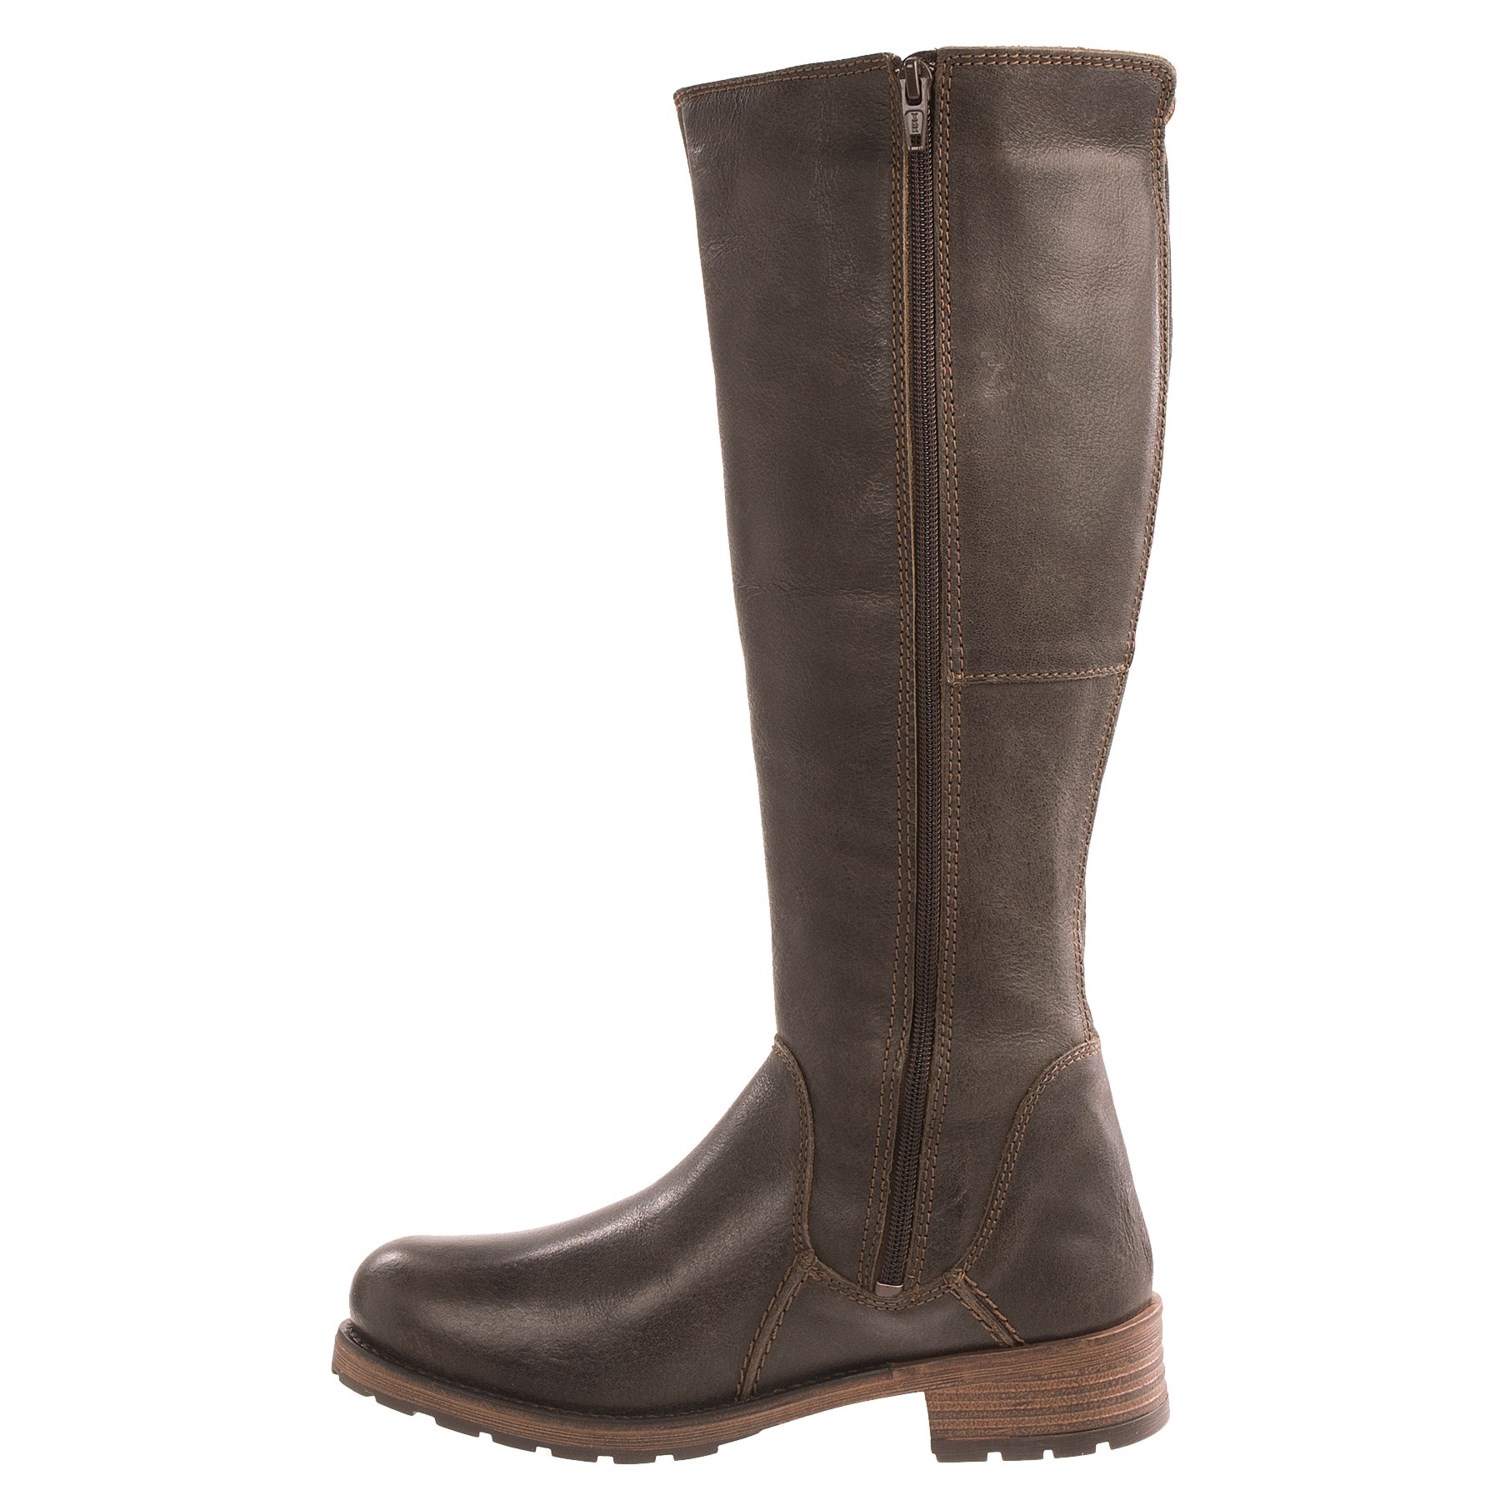 Bos. & Co. Bella Tall Leather Boots (For Women) 8107R - Save 31%